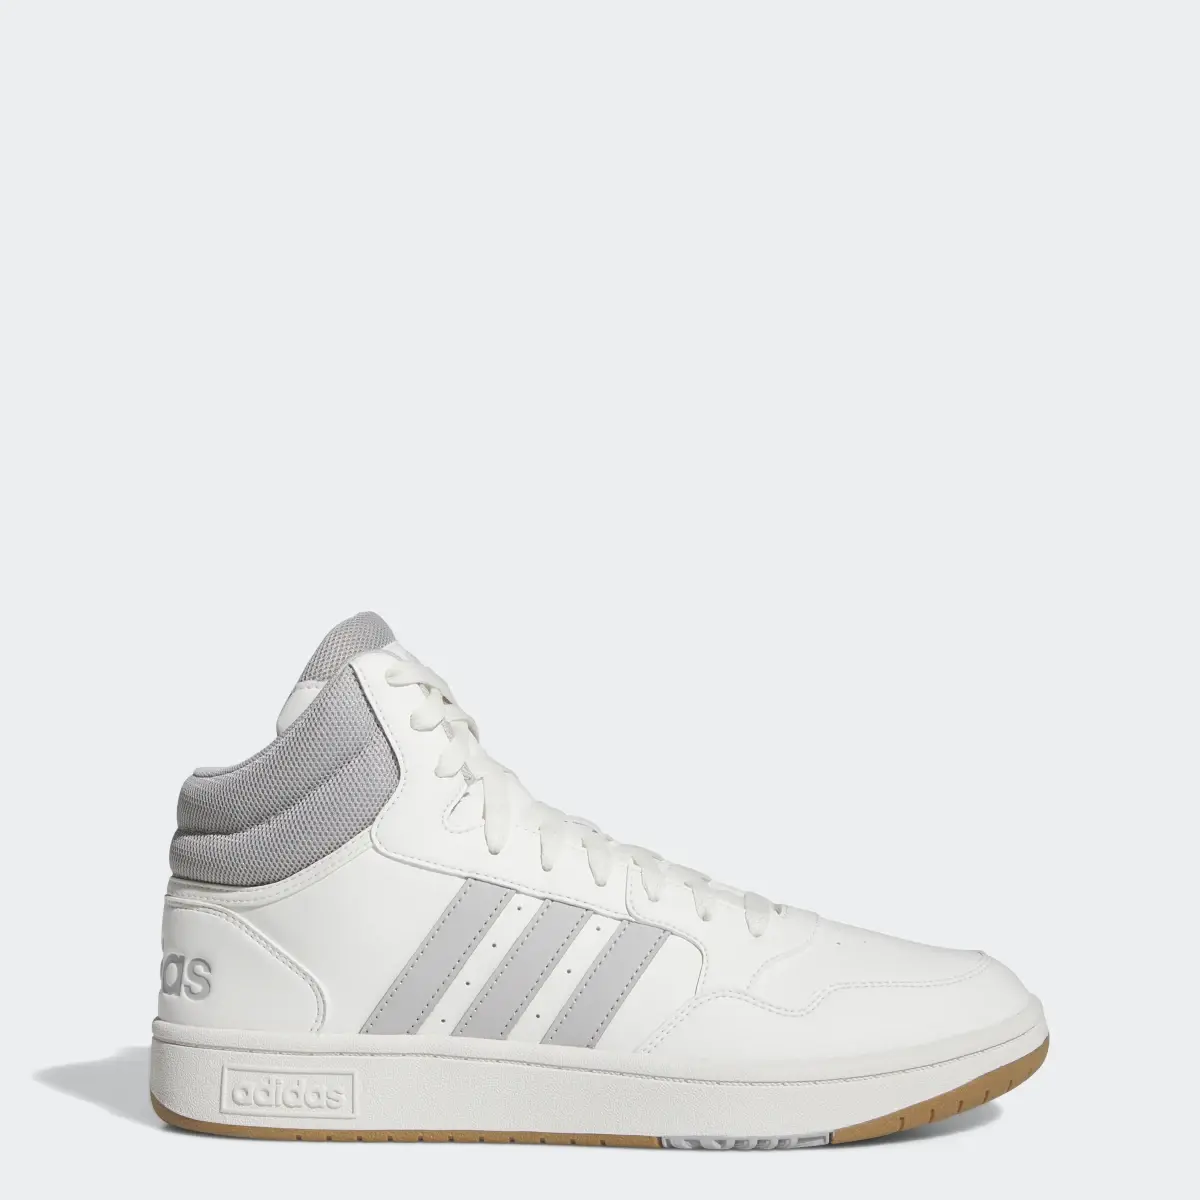 Adidas Hoops 3.0 Mid Lifestyle Basketball Classic Vintage Schuh. 1